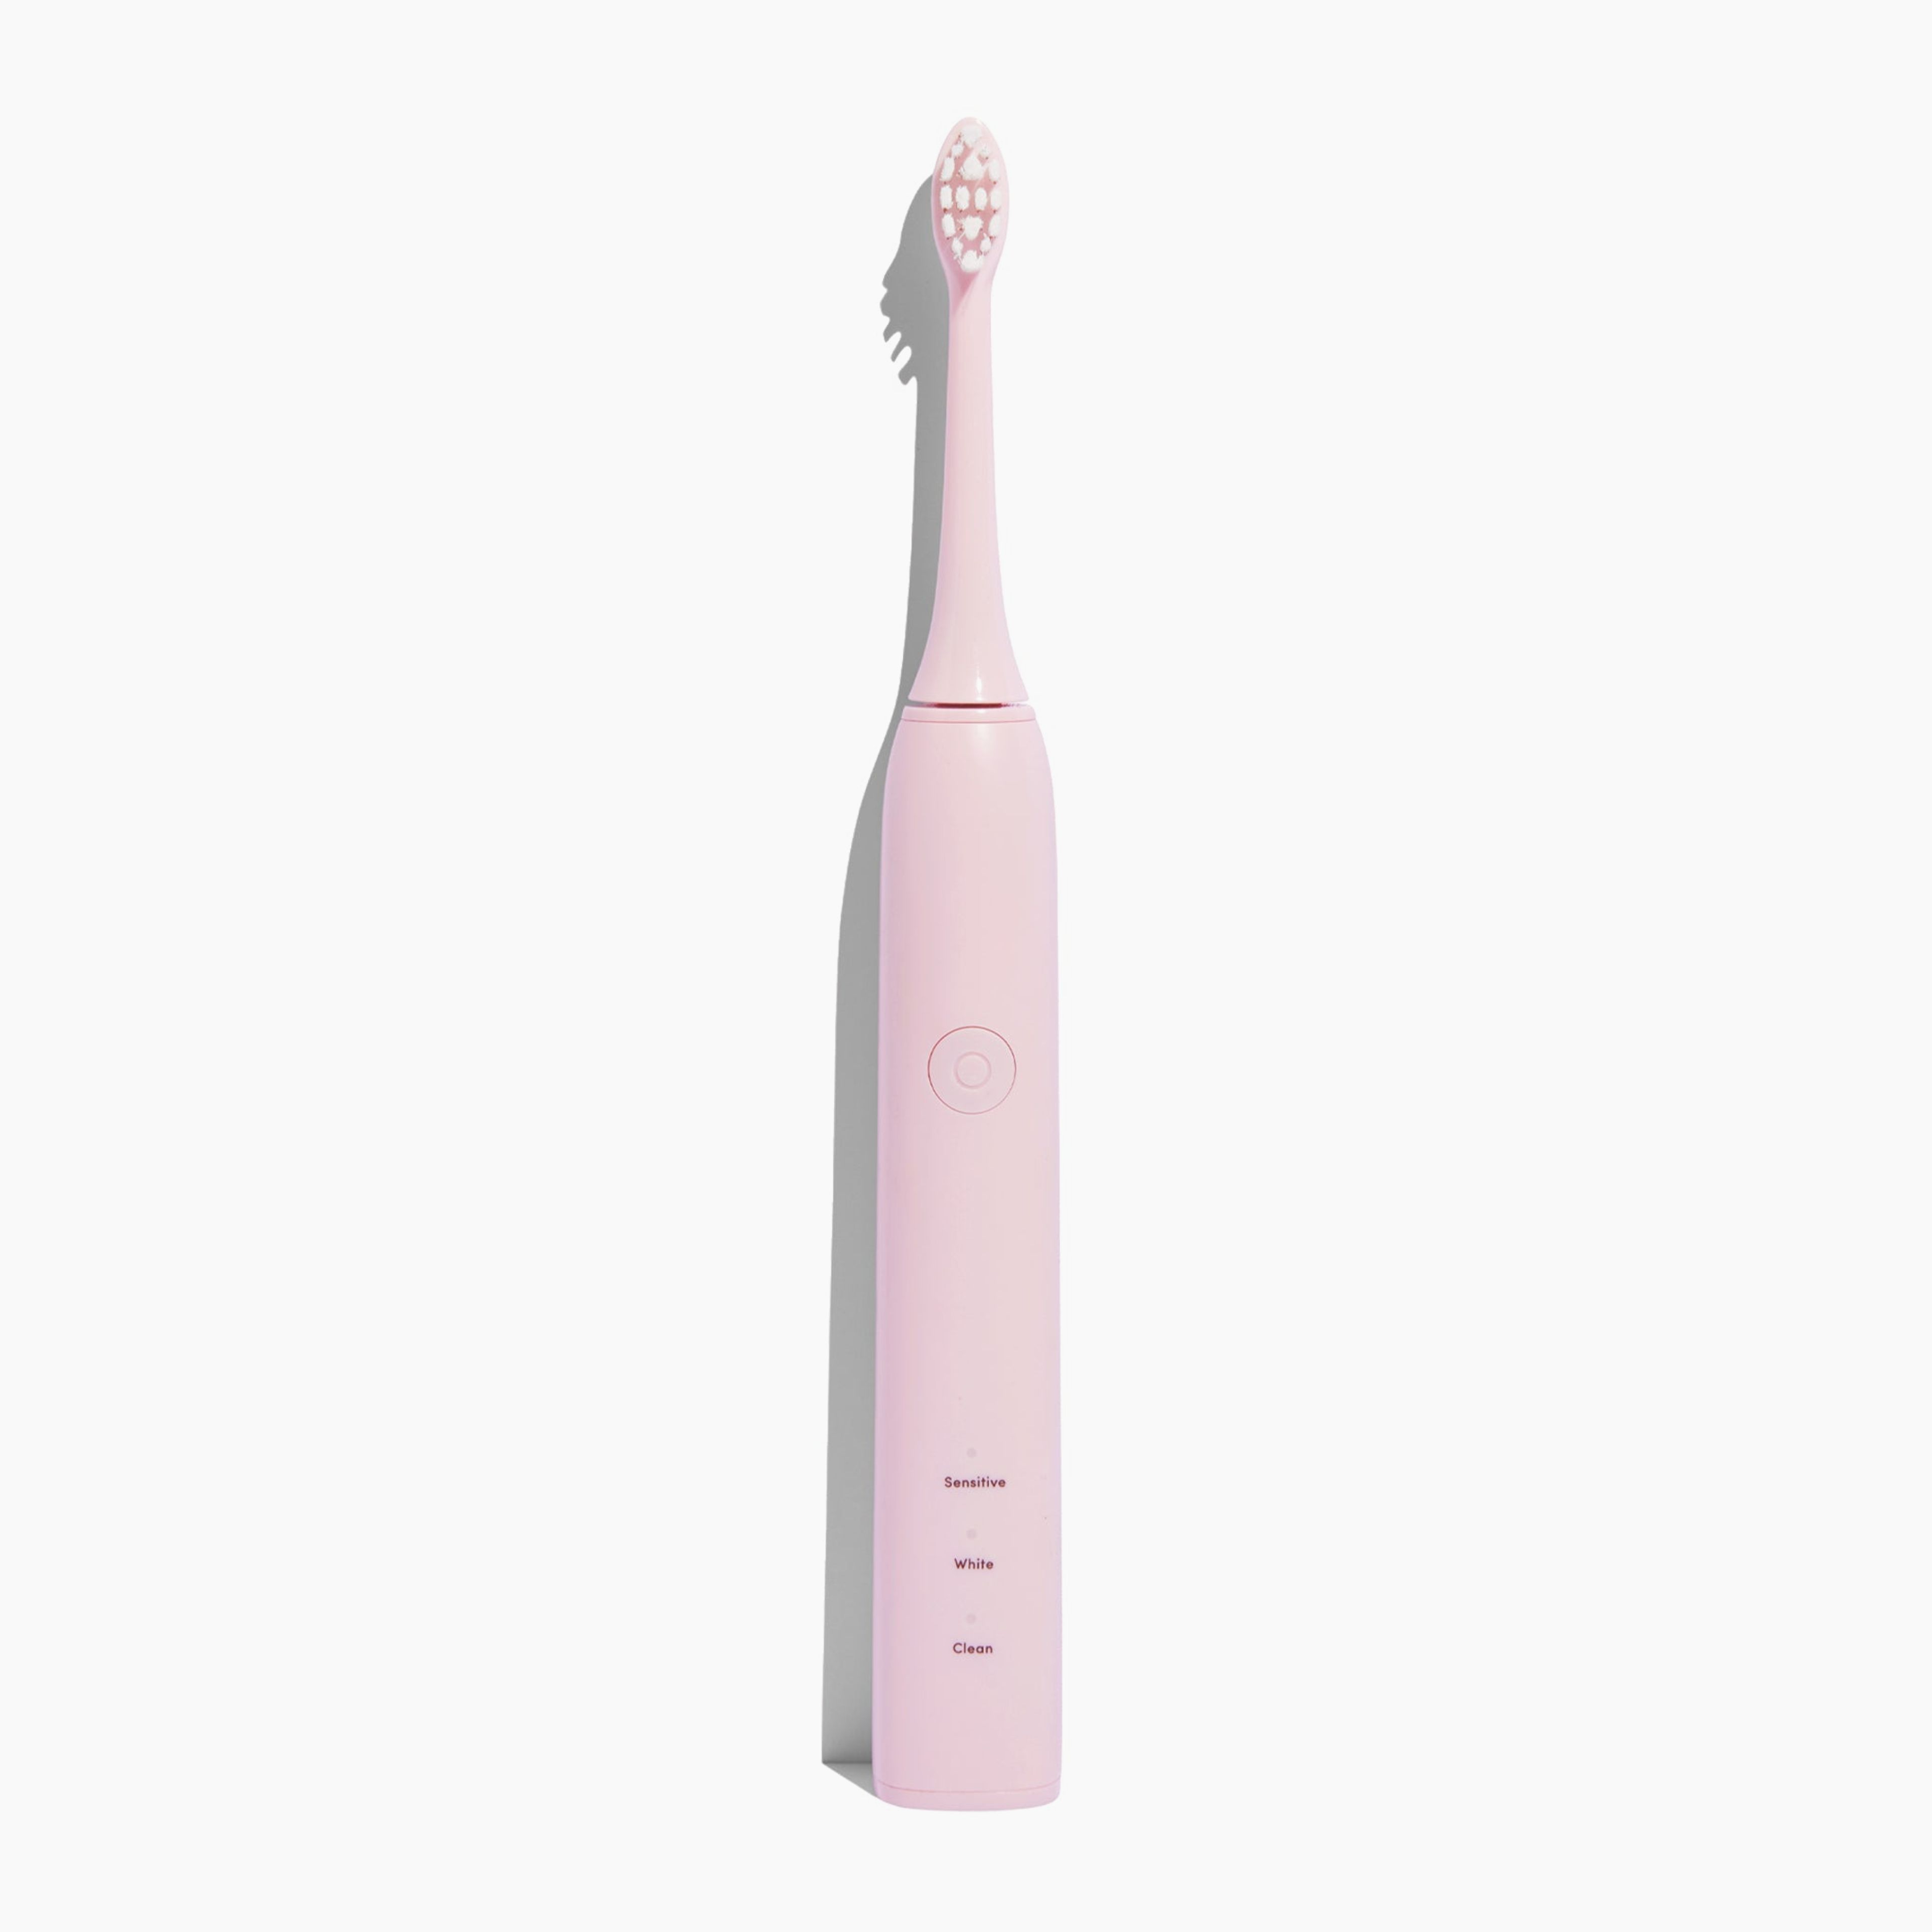 Gem Electric Toothbrush: Coconut